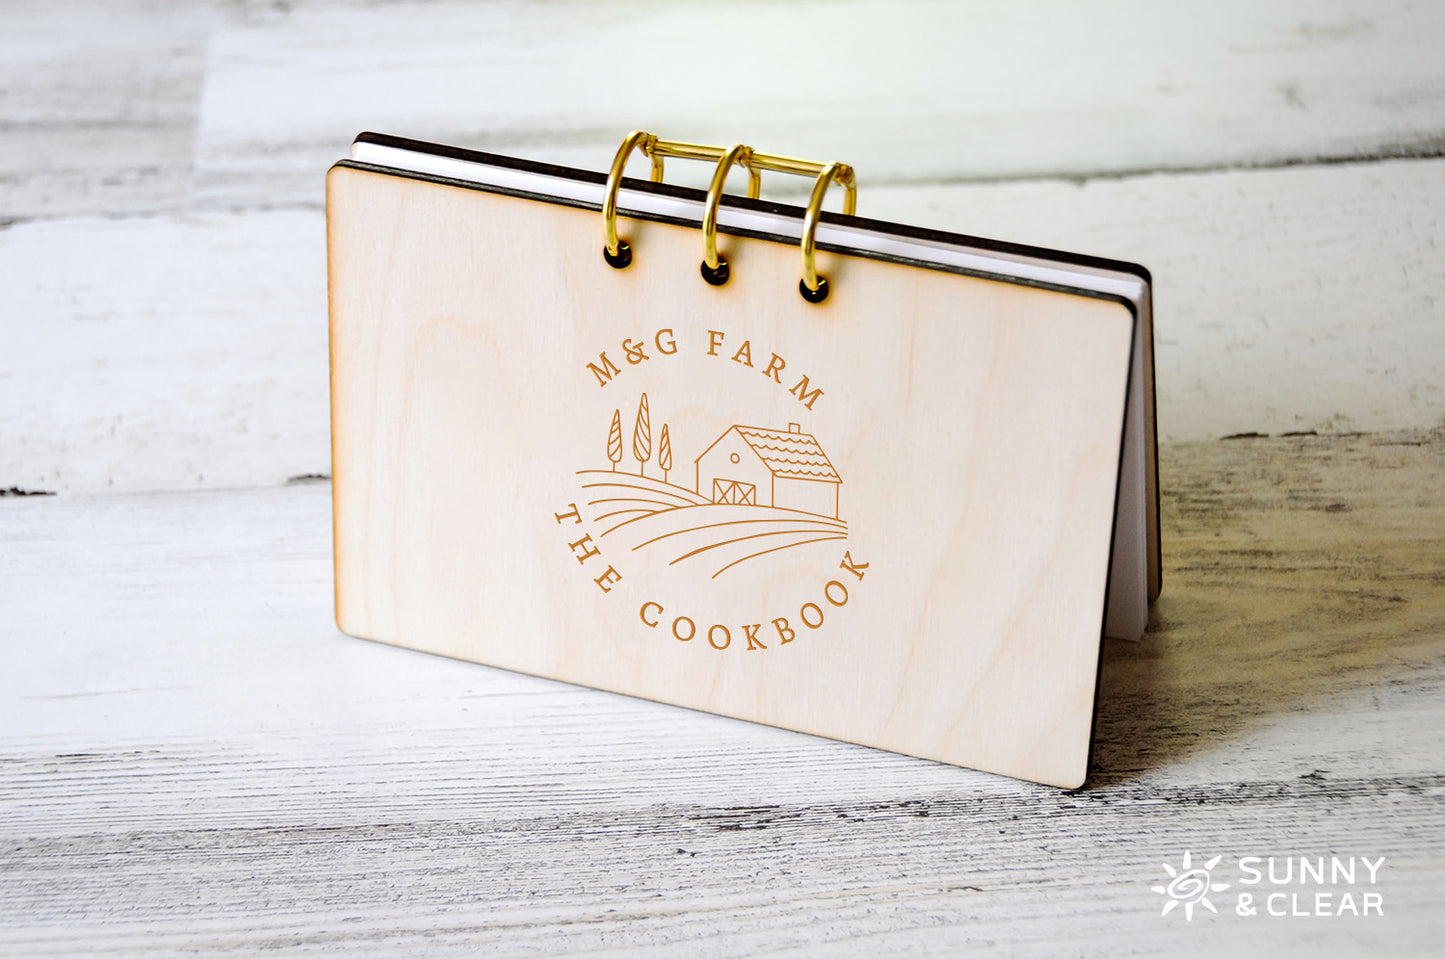 Your LOGO, Custom Recipe Card Binder, 4x6 Personalized with Your Business Logo